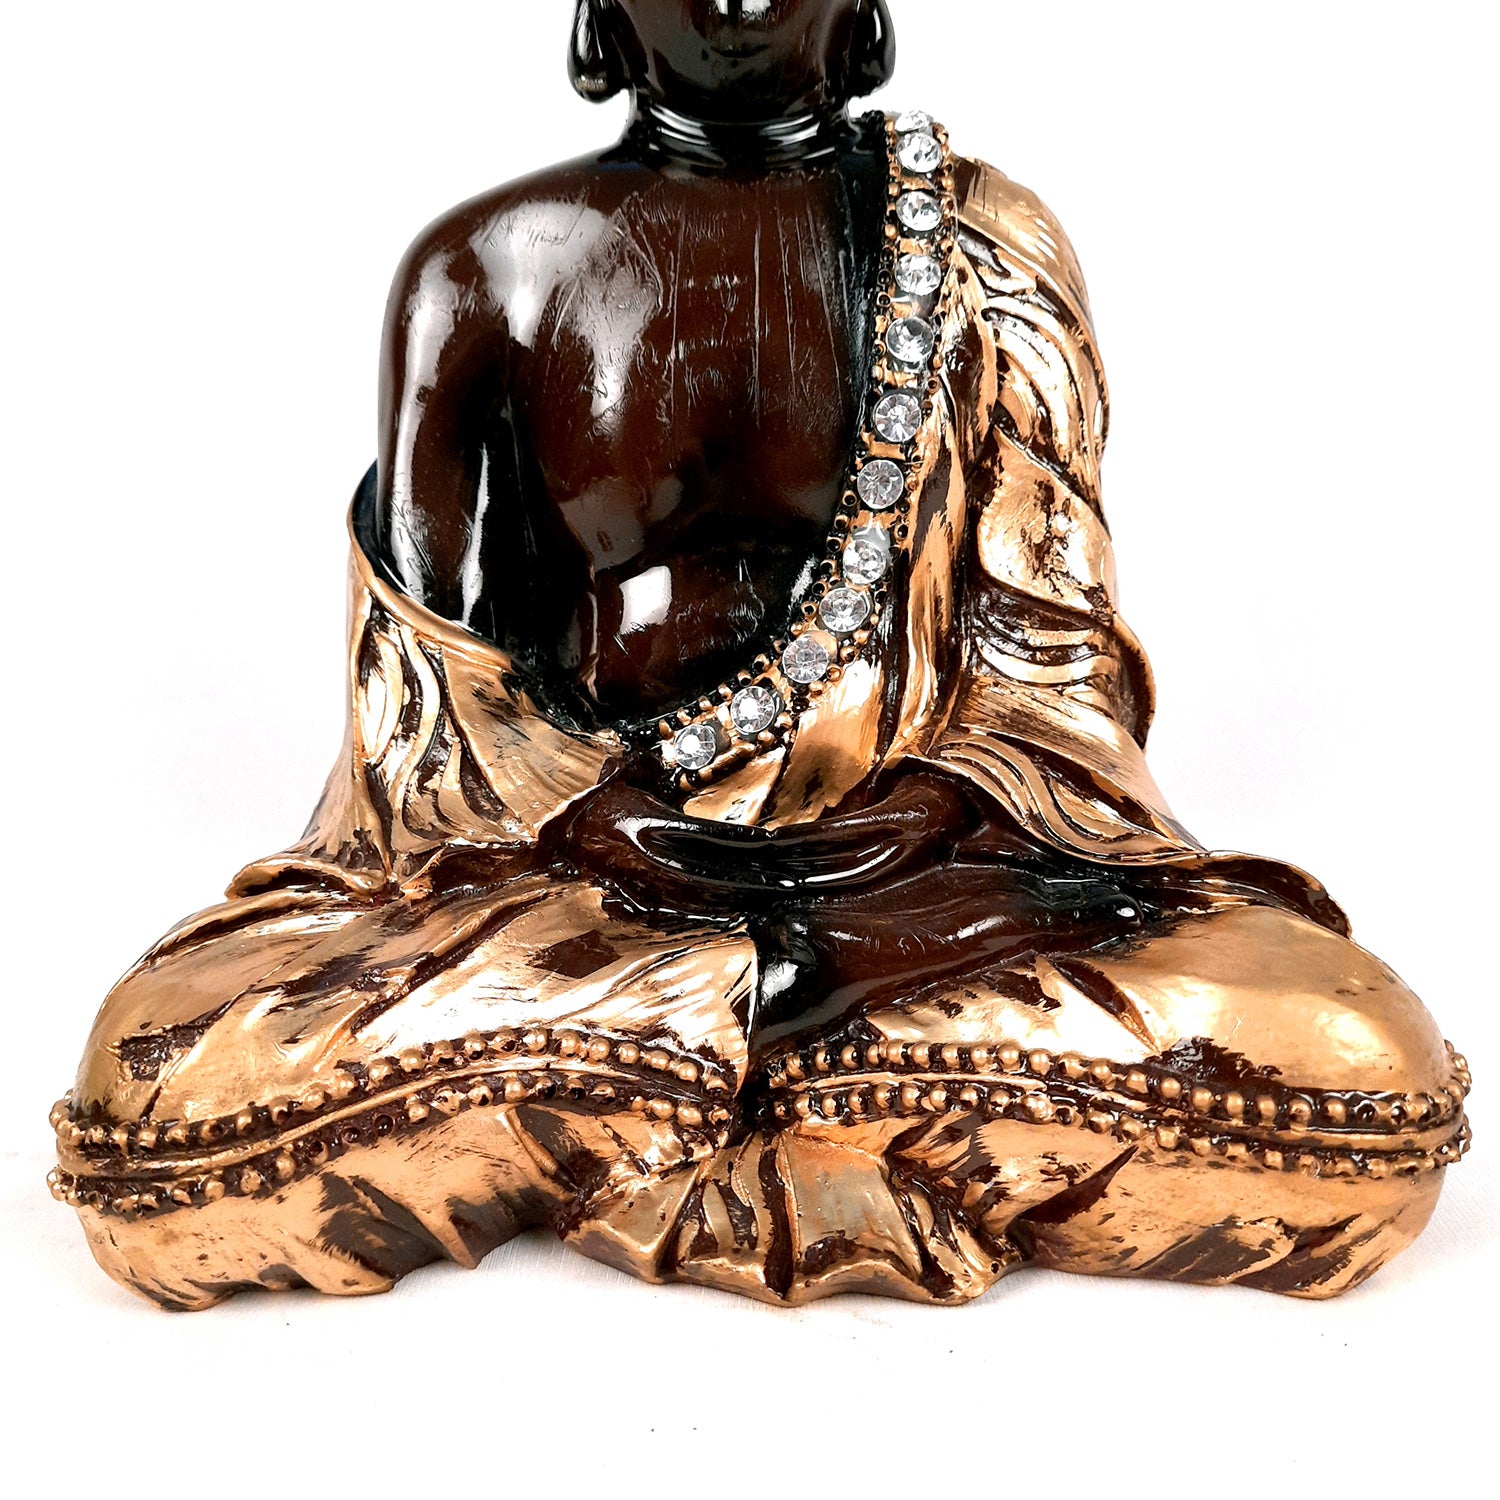 Buddha Statue with | Lord Gautam Buddha Showpiece in Meditation Pose - For Living room, Home, Table, Office Decor & Gift - 11 Inch - Apkamart